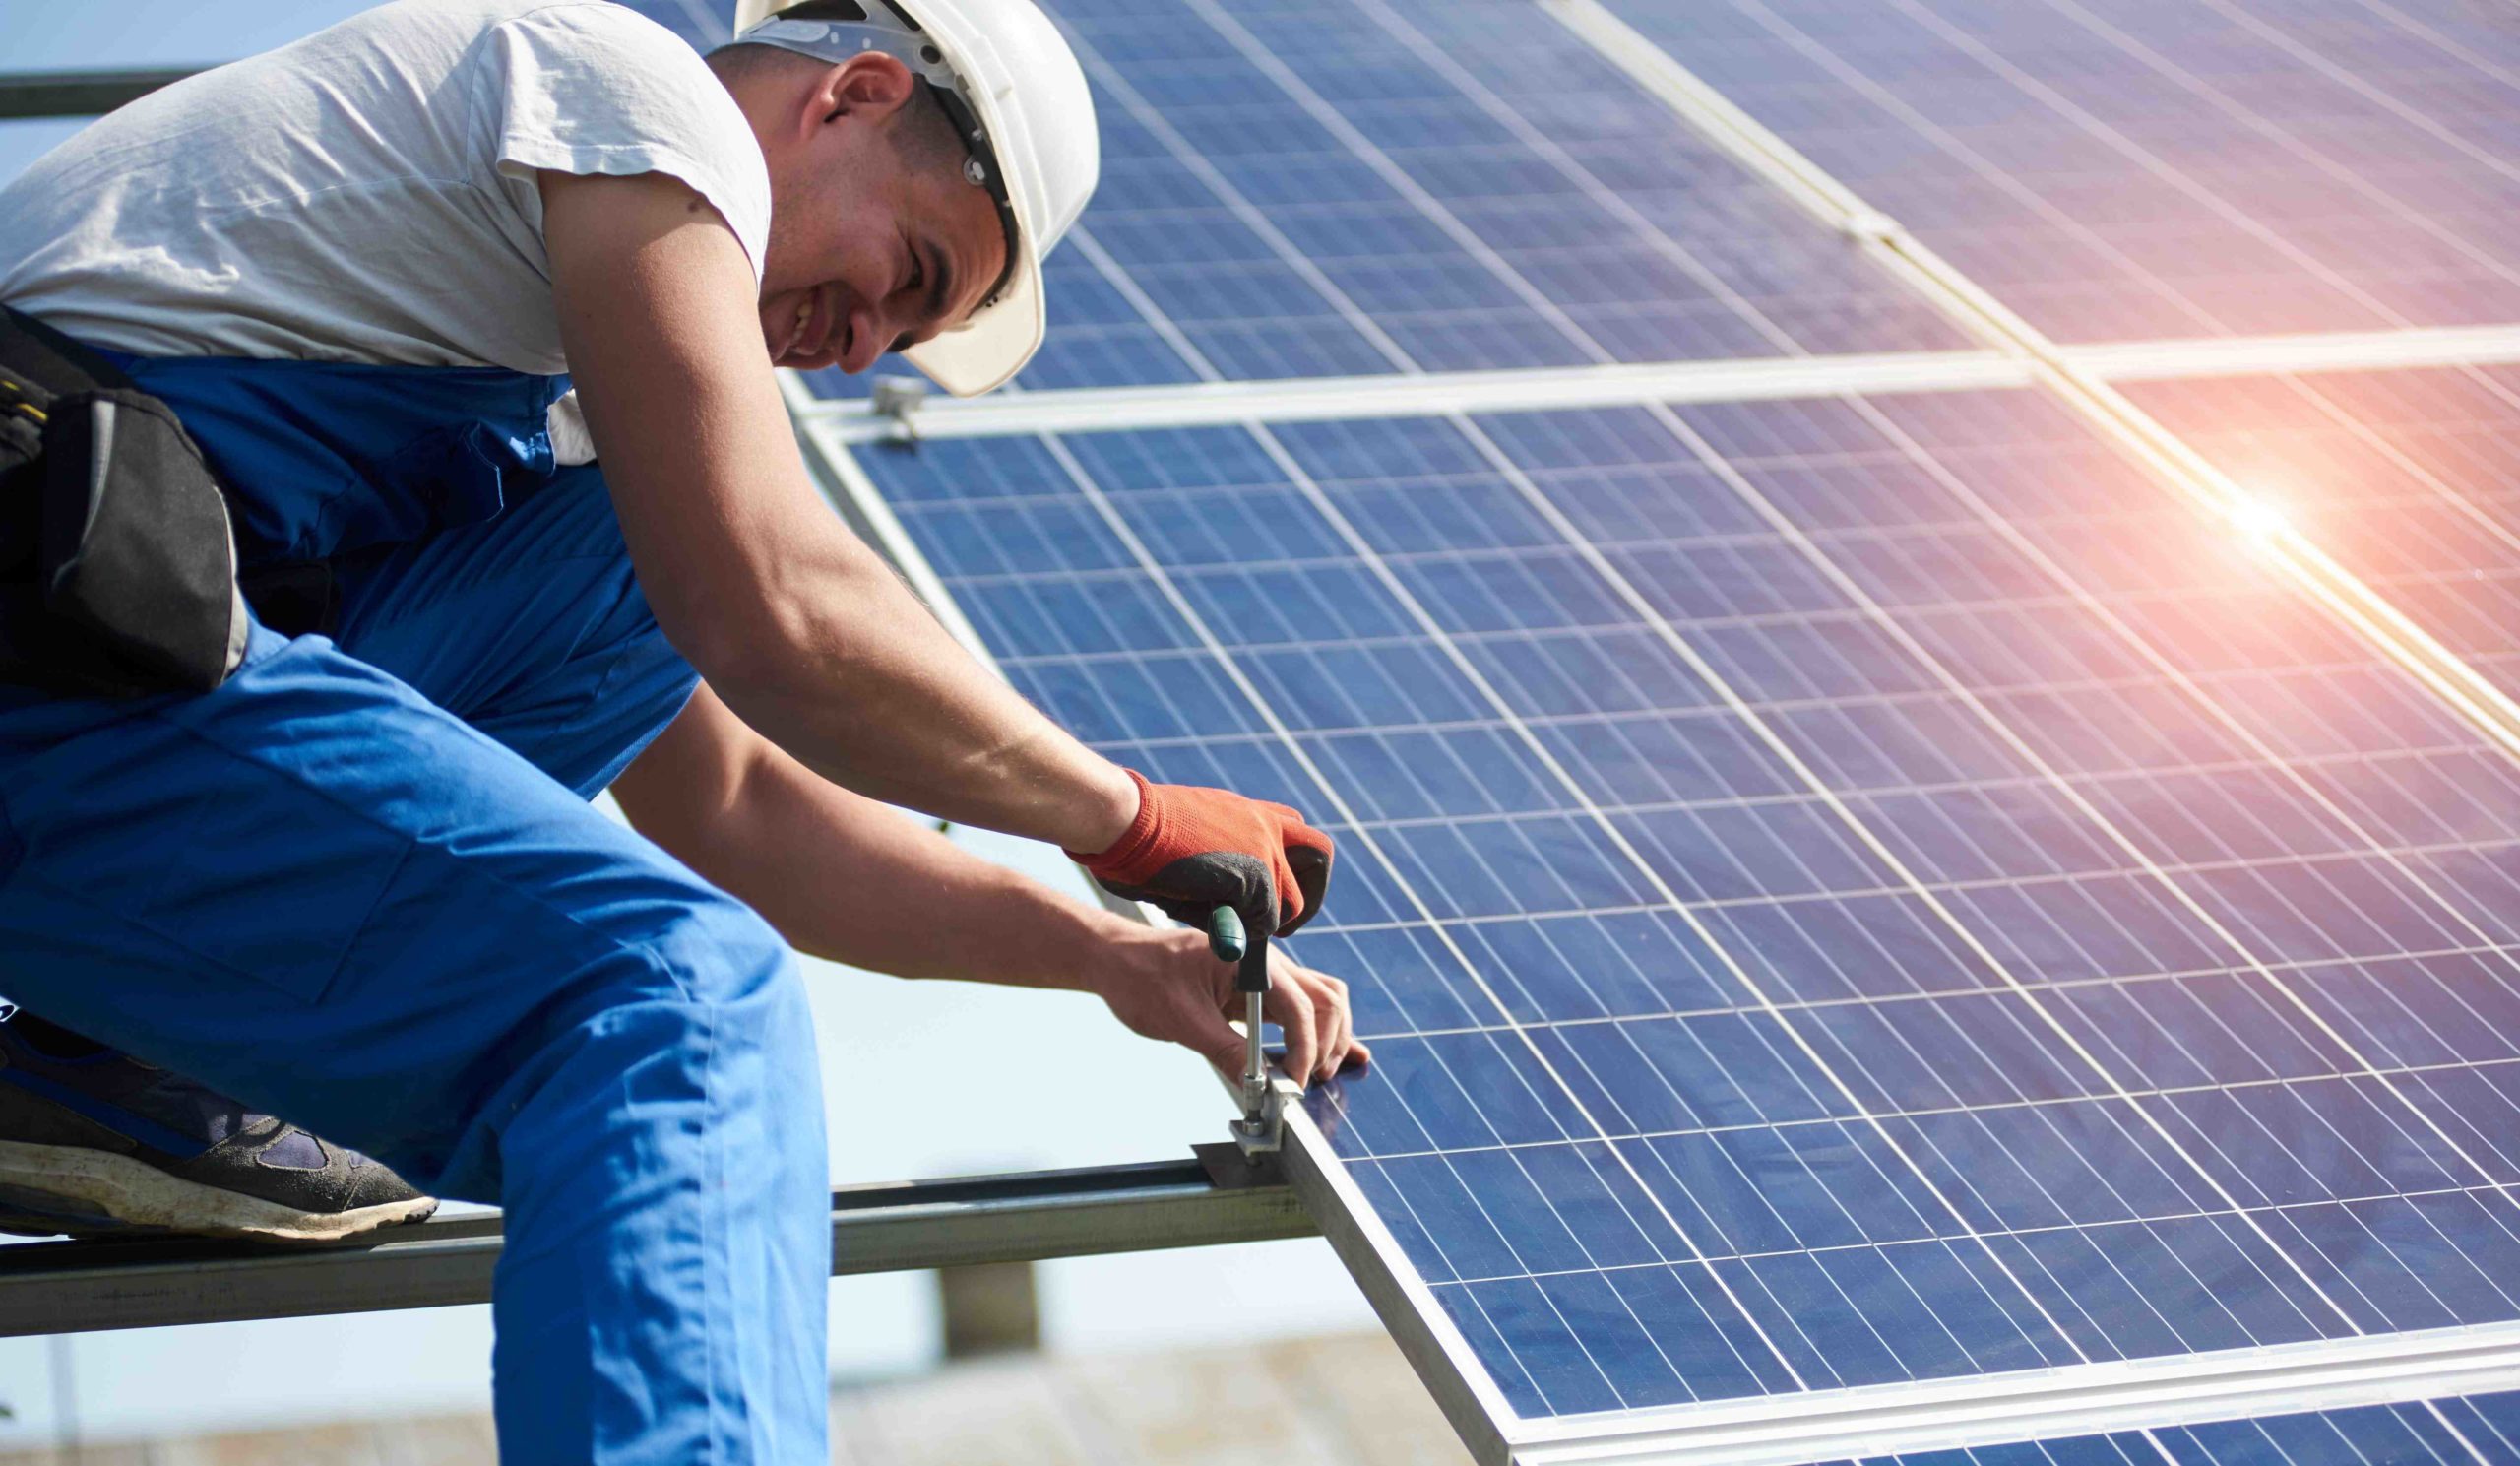 Can you really get solar panels installed for free?